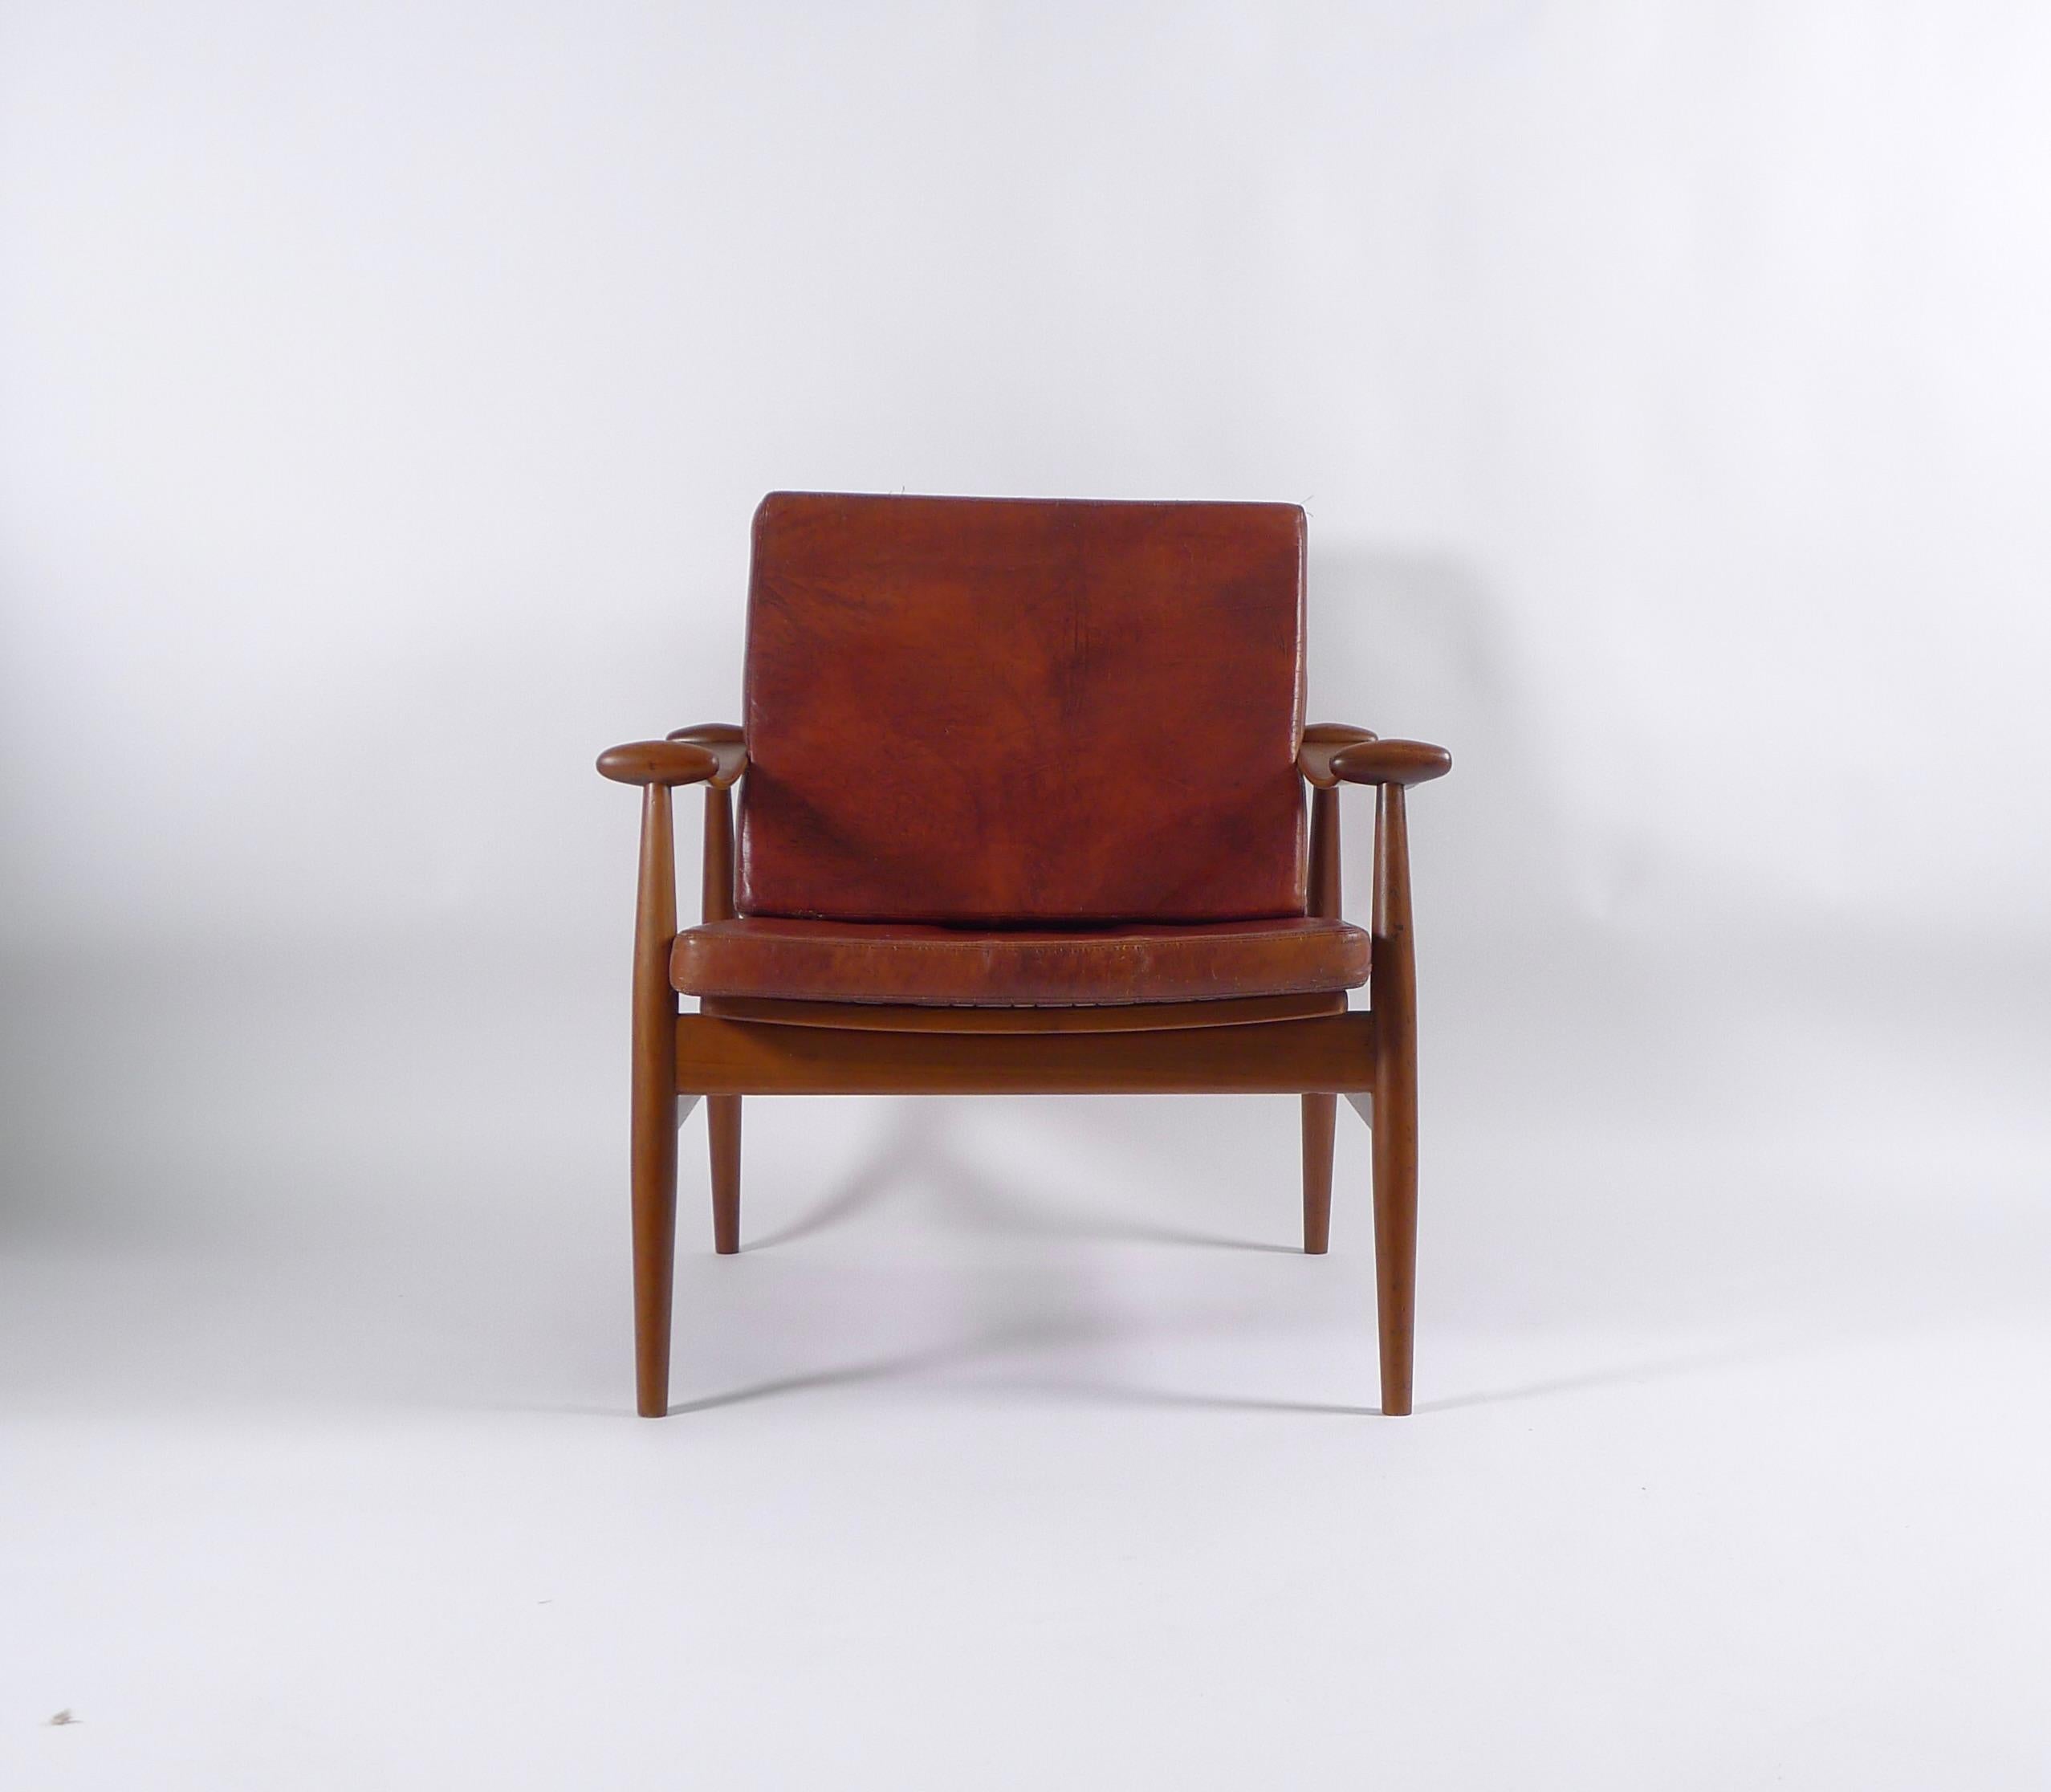 Leather Finn Juhl Spade Chair, Model Fd133, 1950s, Produced by France & Son, with Label